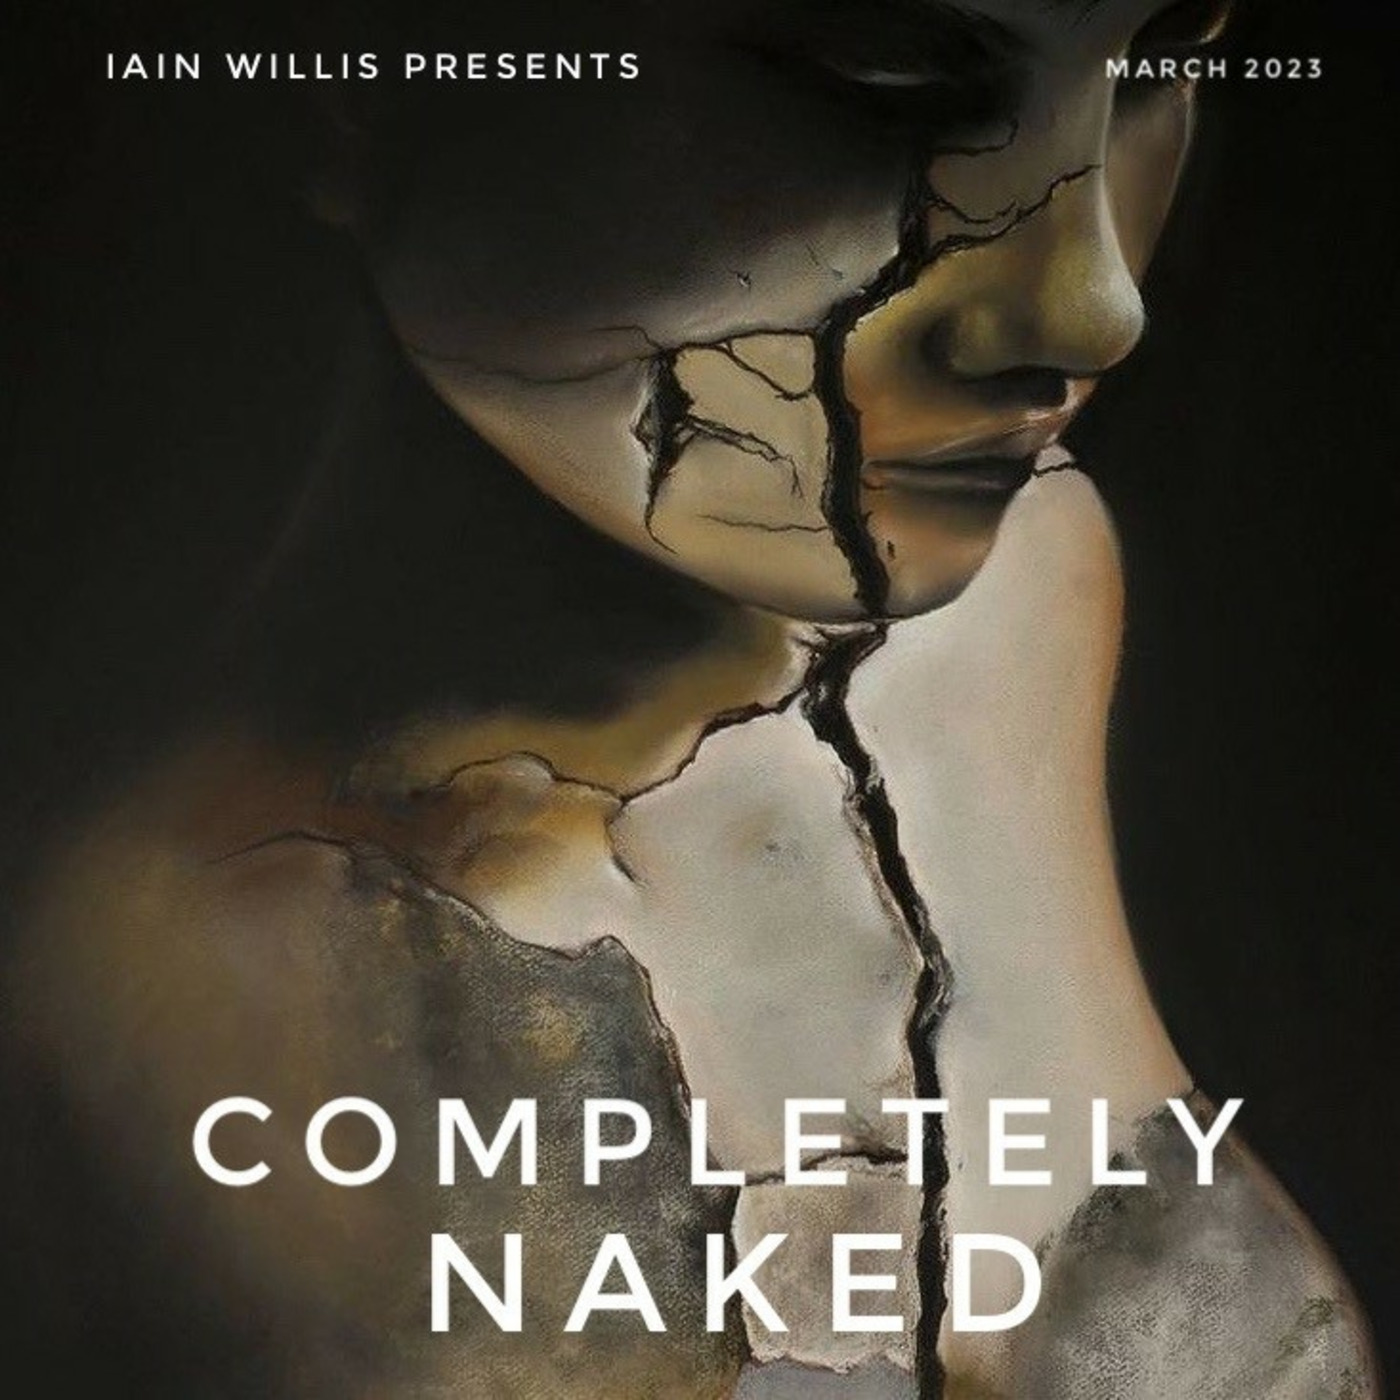 Iain Willis Presents - Completely Naked